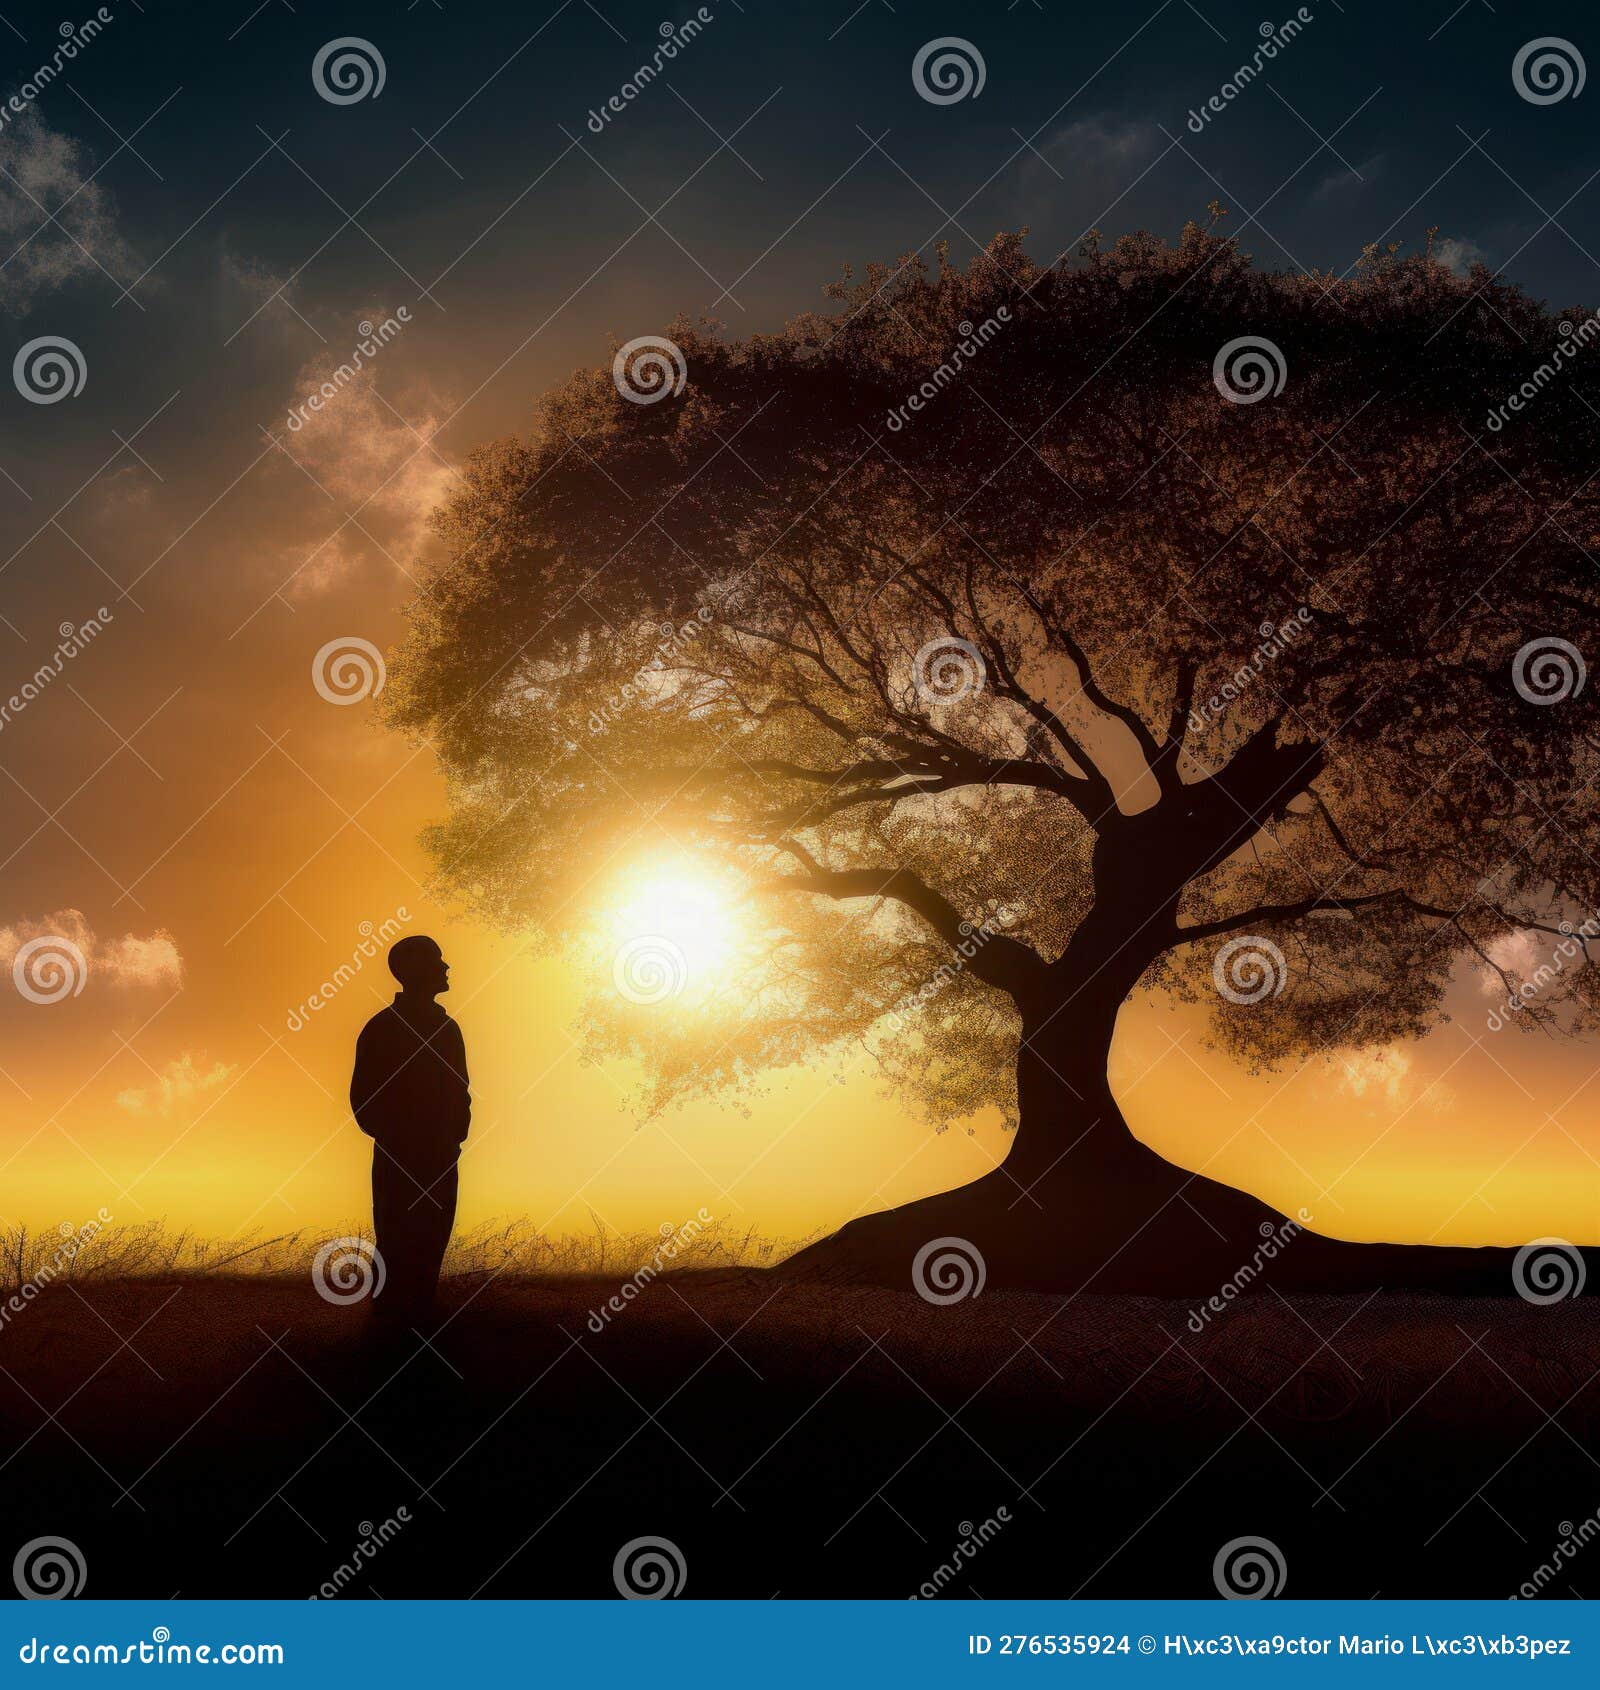 silhouette of a person next to a tree